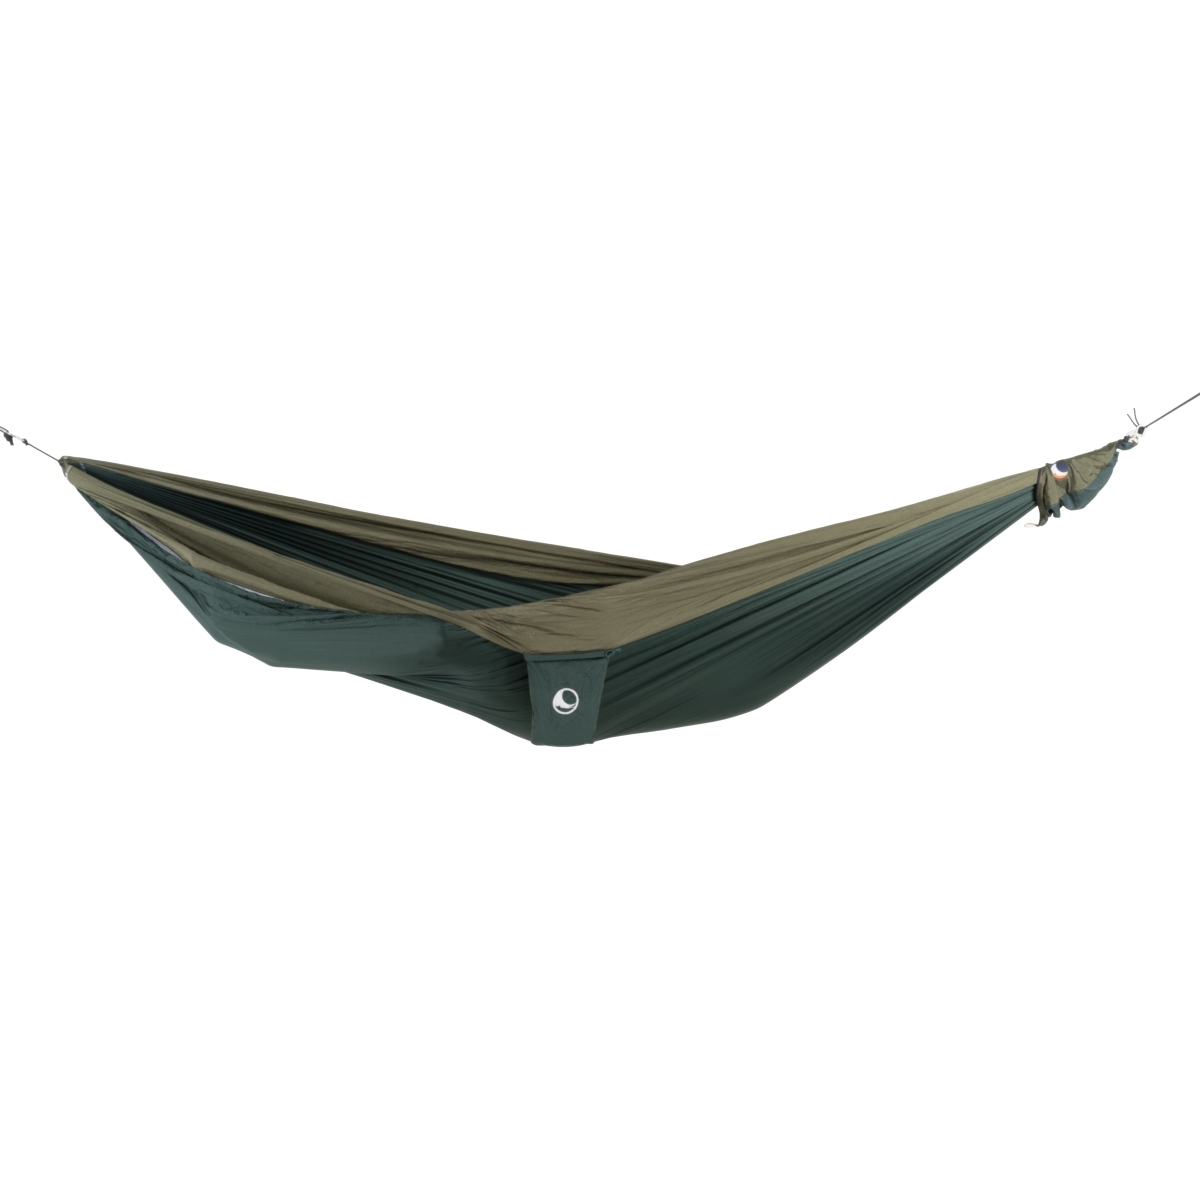 Picture of Ticket To The Moon Travel Hammock - Original - Dark Green / Army Green